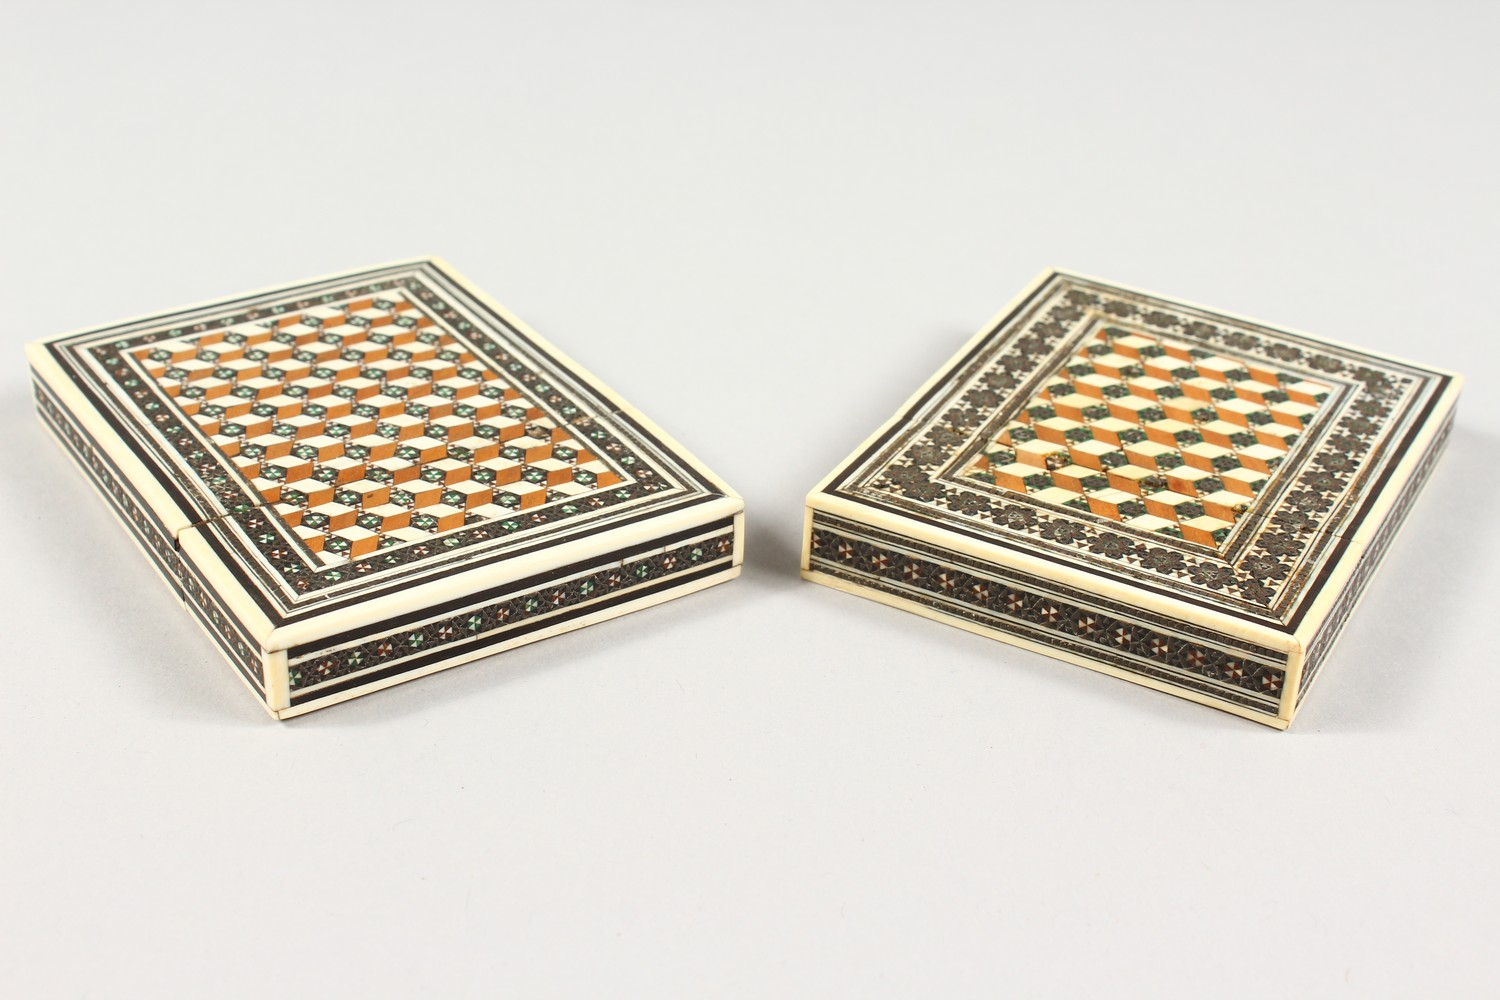 TWO EASTERN INLAID SANDALWOOD CARD CASES. 4ins x 3ins. - Image 2 of 3